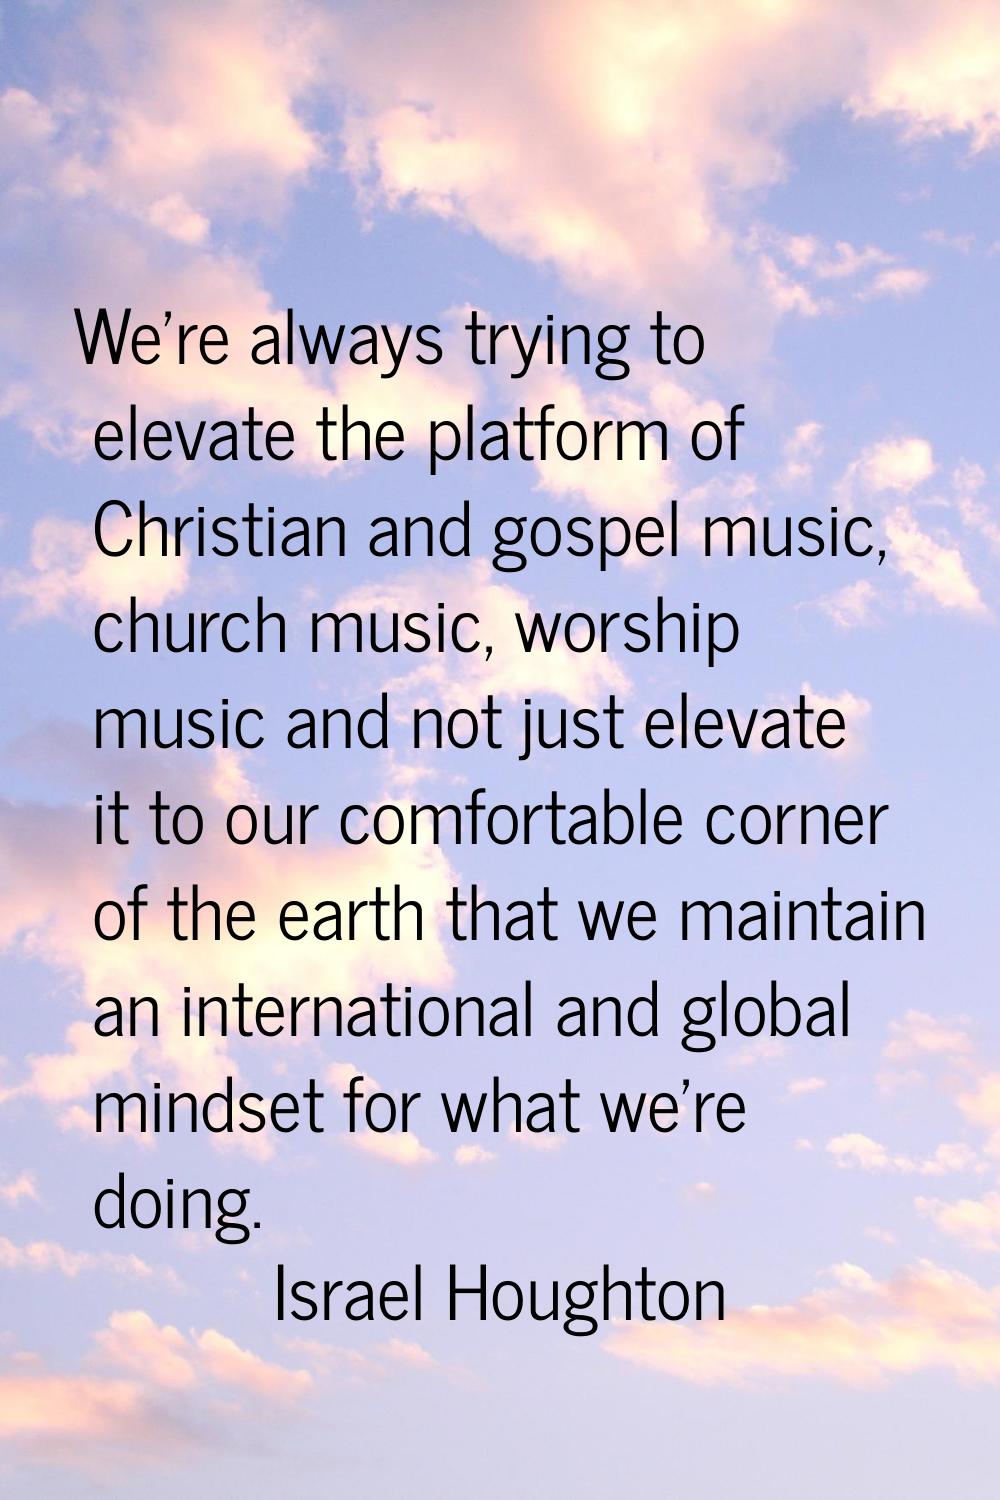 We're always trying to elevate the platform of Christian and gospel music, church music, worship mu